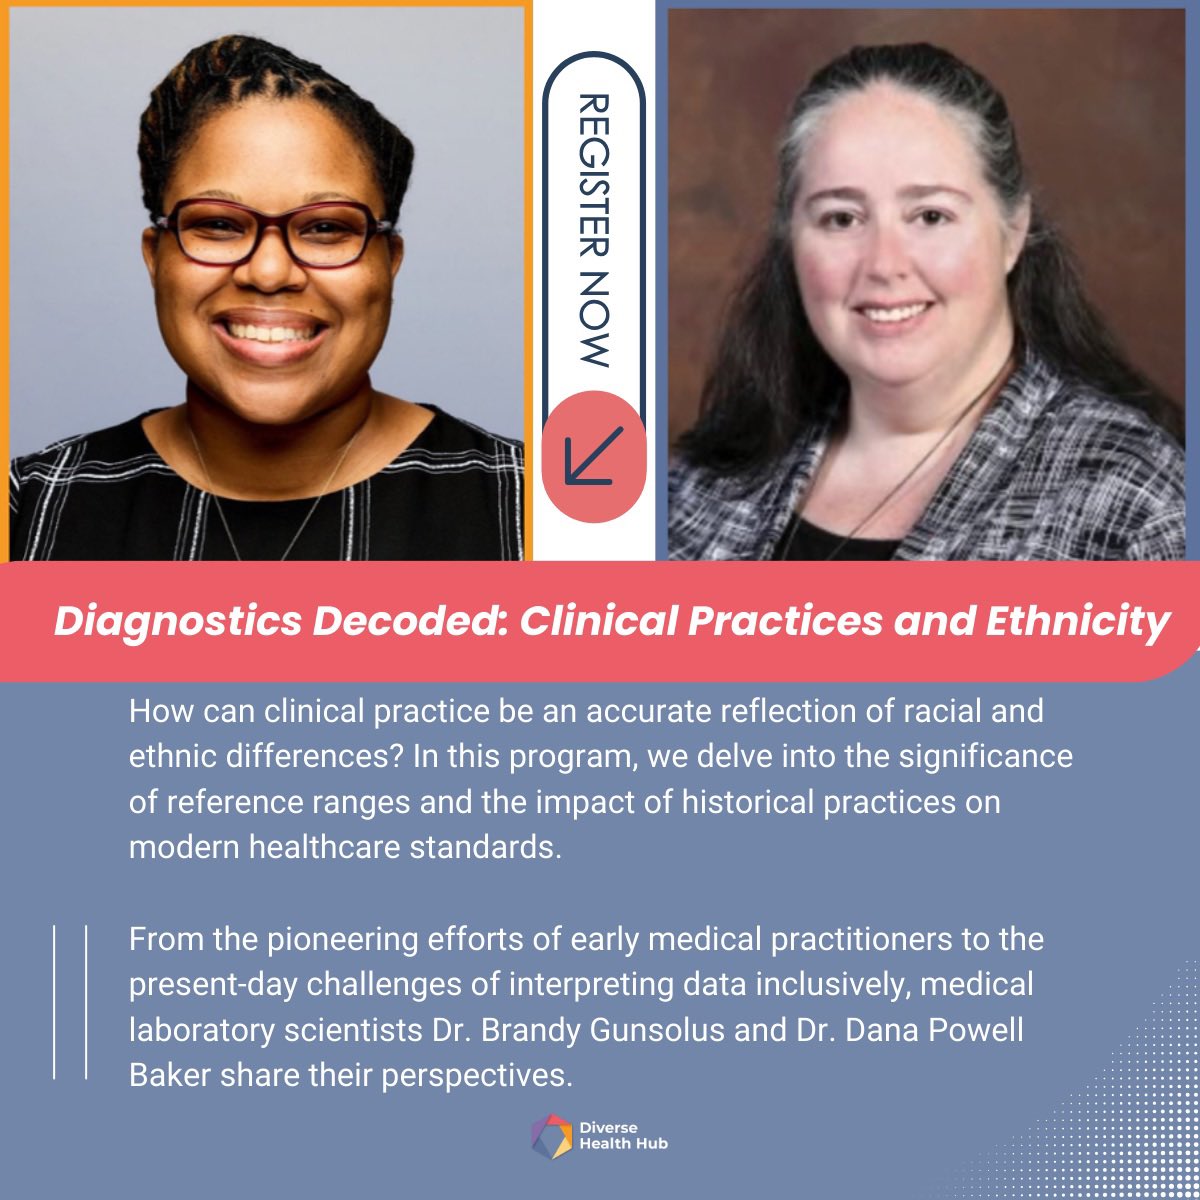 🚨Our new #DiagnosticsDecoded 🎥 is LIVE!🚨 In this insightful discussion, Dr. Dana Powell Baker @ThatLabChick and Dr. Brandy Gunsolus @BnrdG explore how historical practices have shaped the use of #race in establishing #lab test reference ranges. Watch: bit.ly/3USgAV5